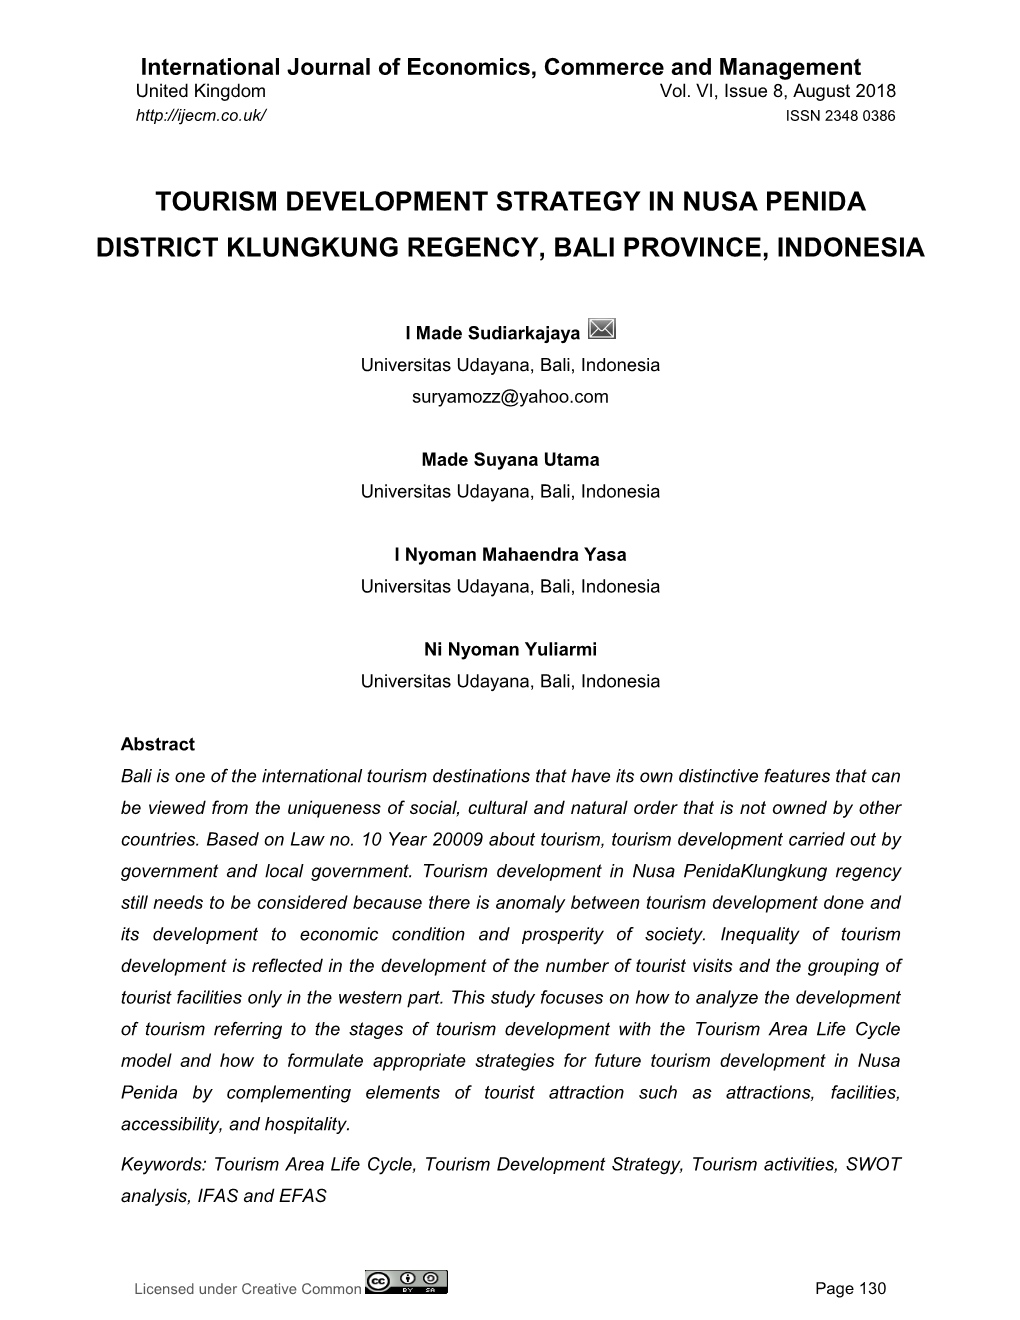 Tourism Development Strategy in Nusa Penida District Klungkung Regency, Bali Province, Indonesia